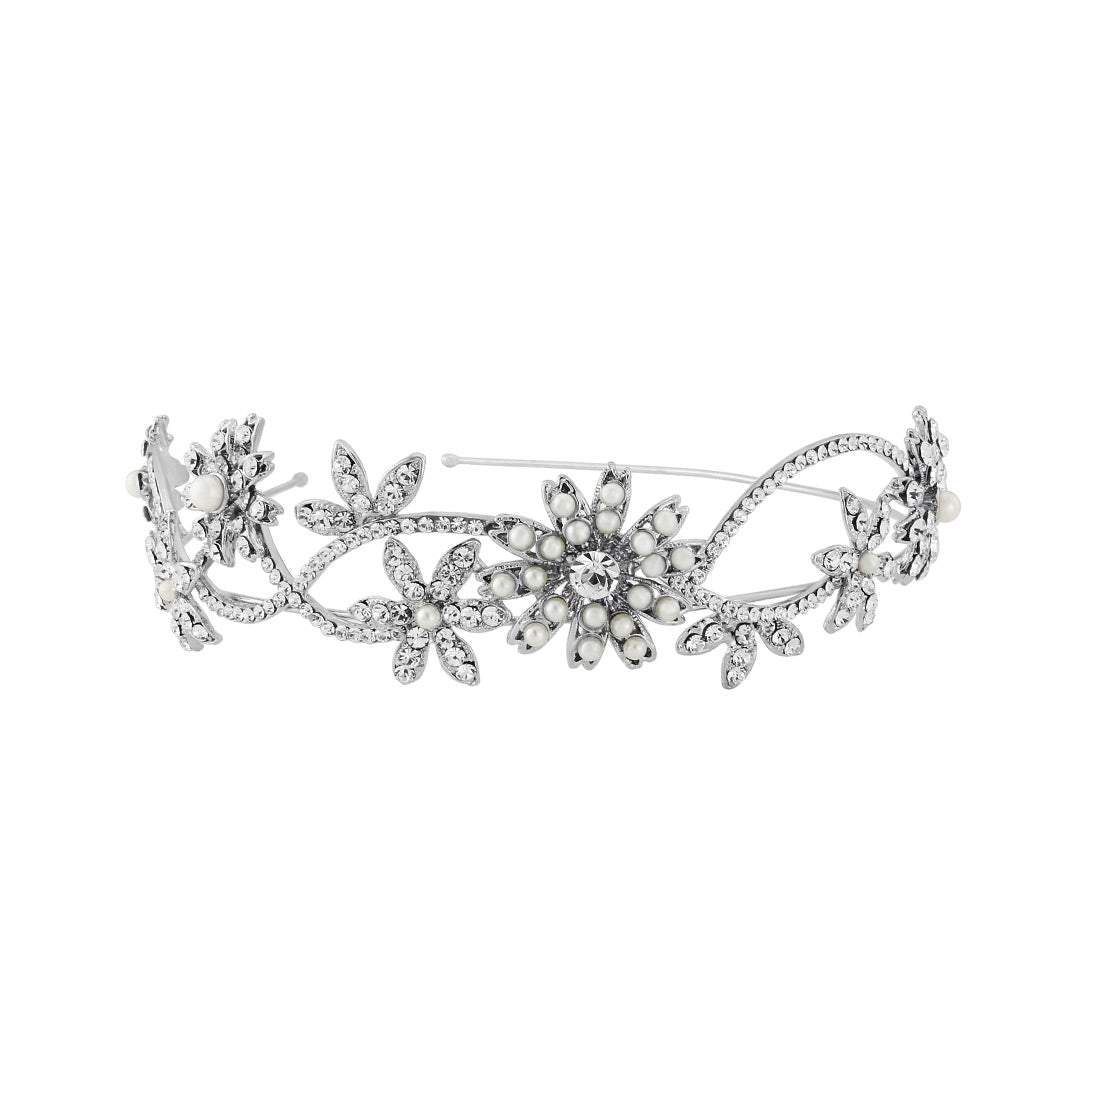 Wedding Hair Accessories Product Section